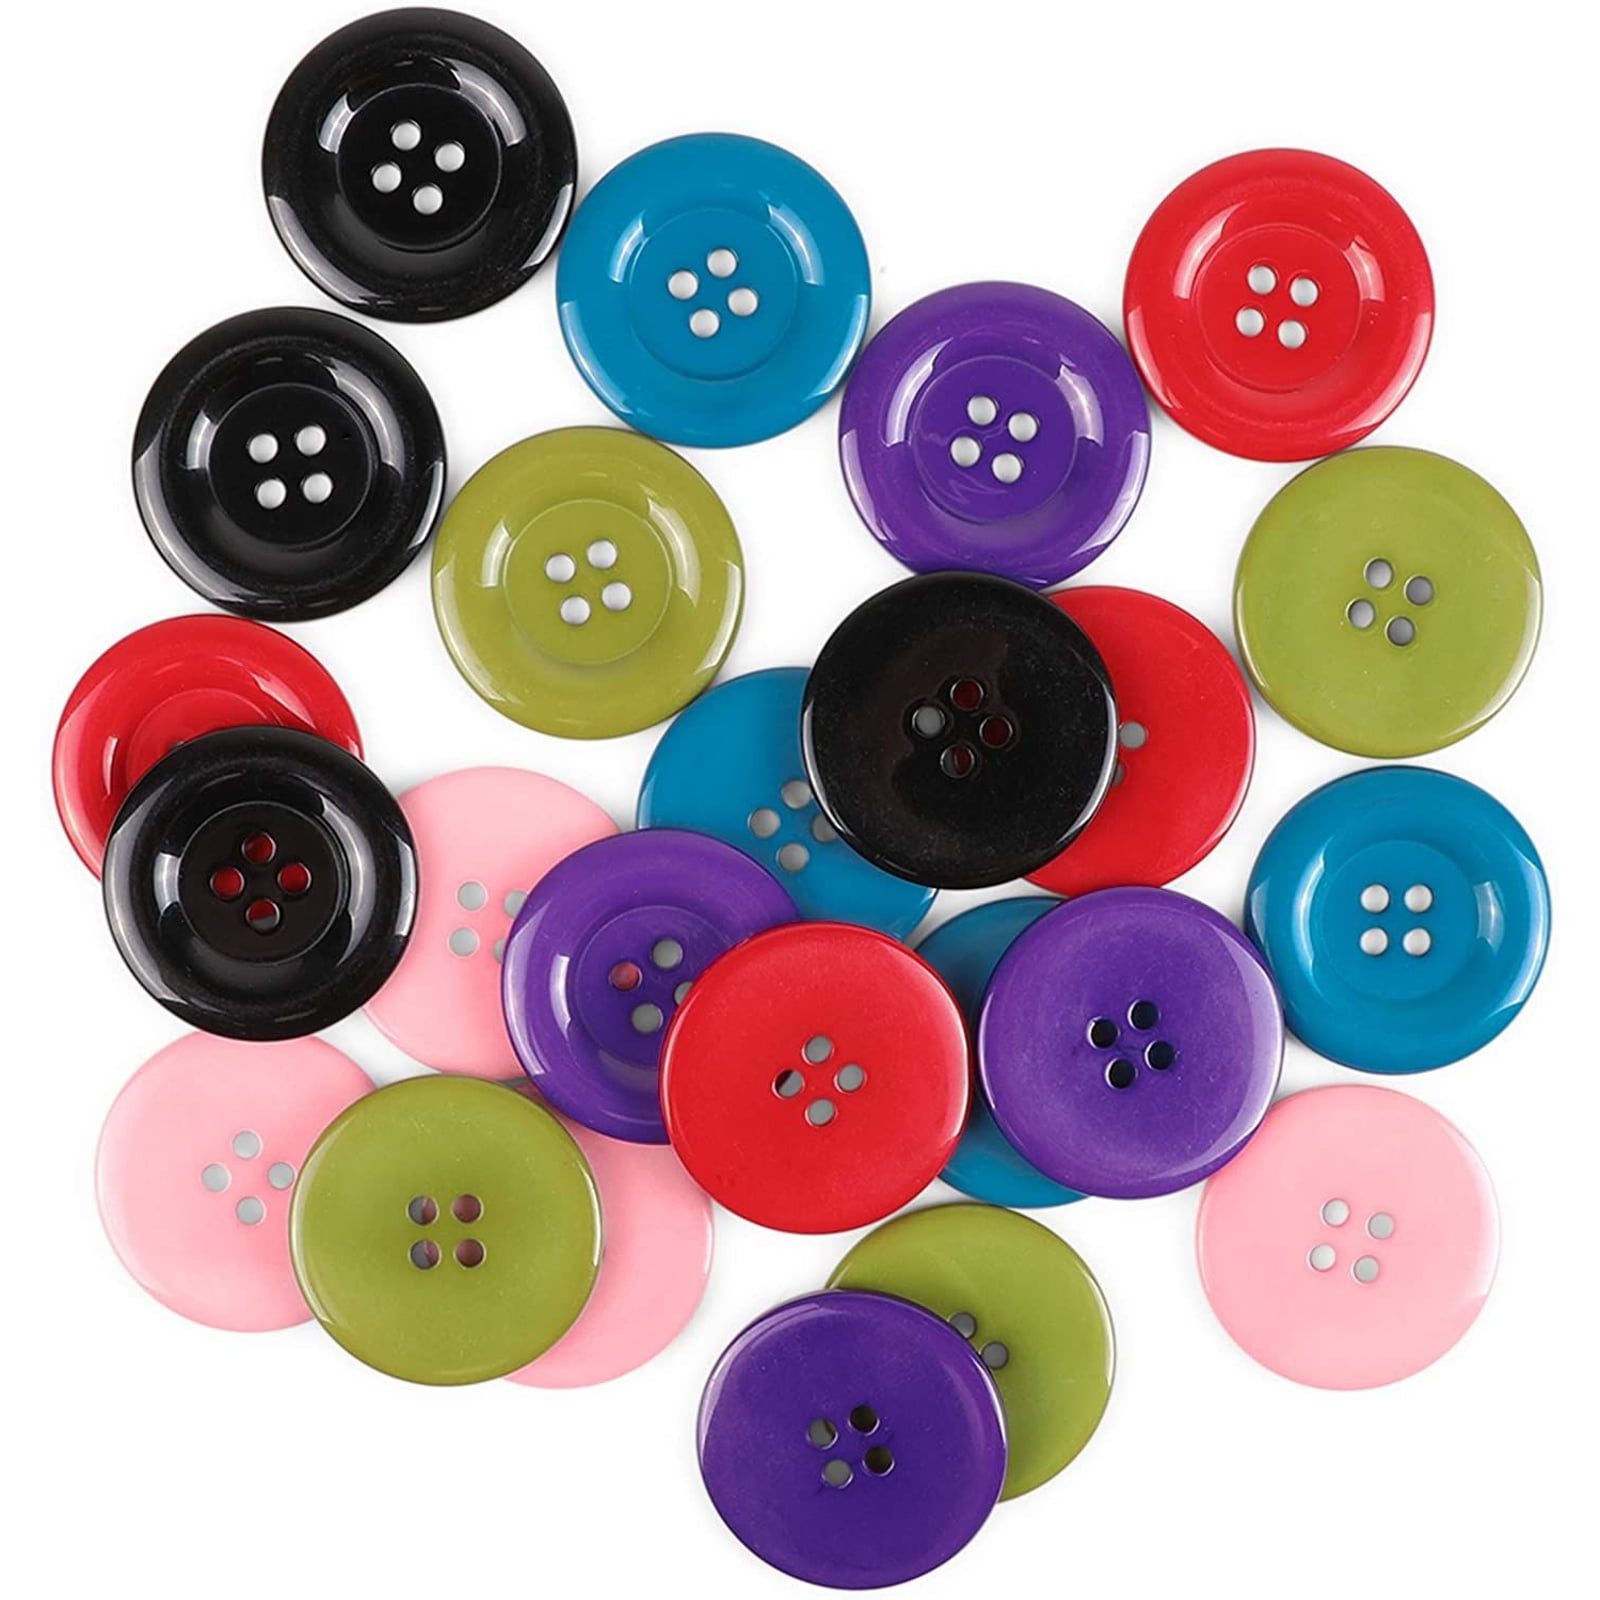 Round circular for kids clothes craft 0.62 inch 1.6 cm 16 mm Set of Seven Vintage Wooden Flower Buttons Set of 7  2-hole Buttons